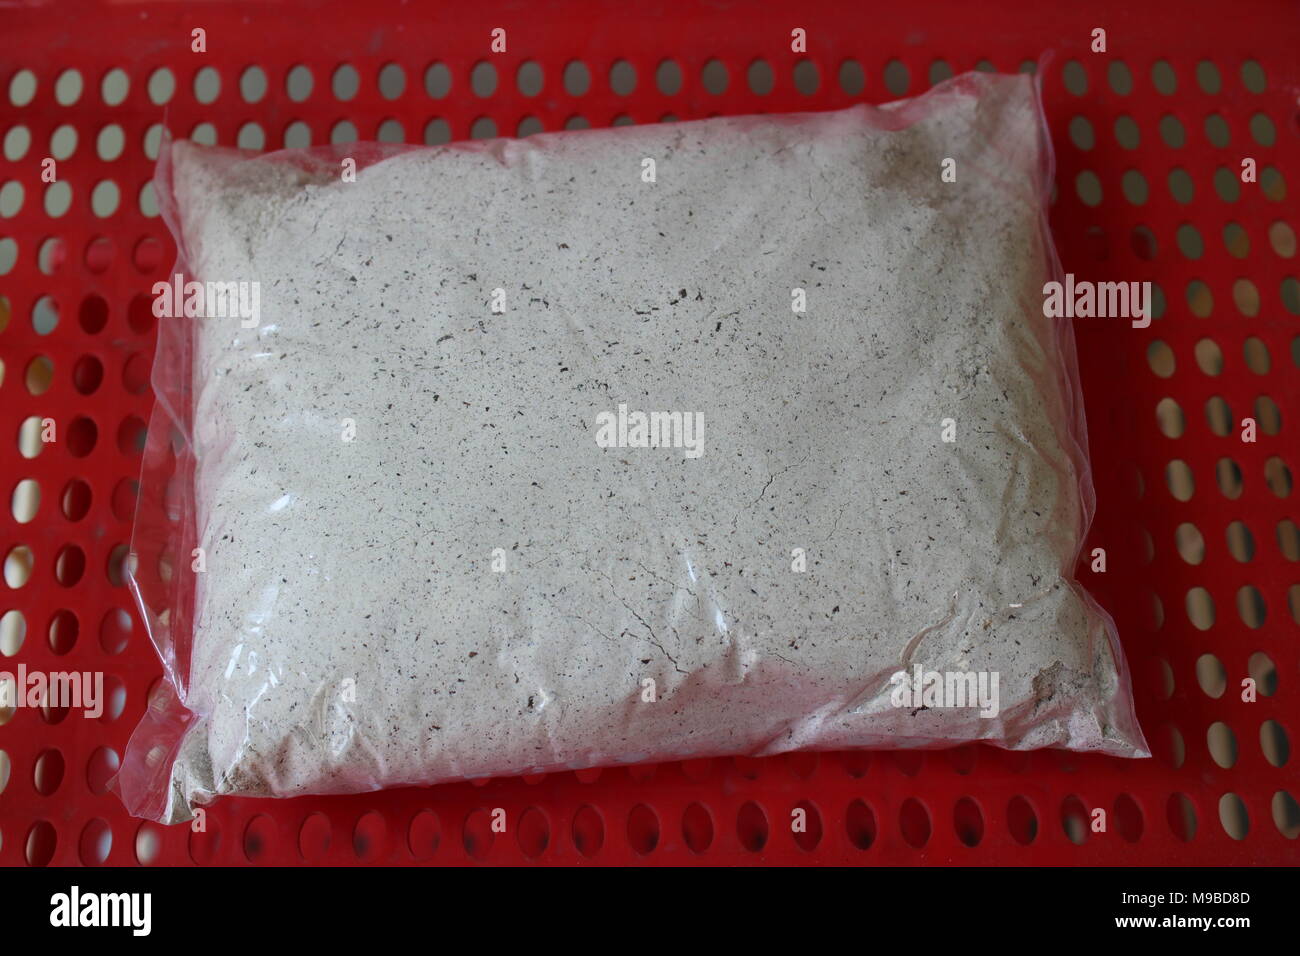 Buckwheat Flour packed inside a transparent polythene packet. It is used for preparing Kuttu ki Roti during Navratri fasting in India Stock Photo